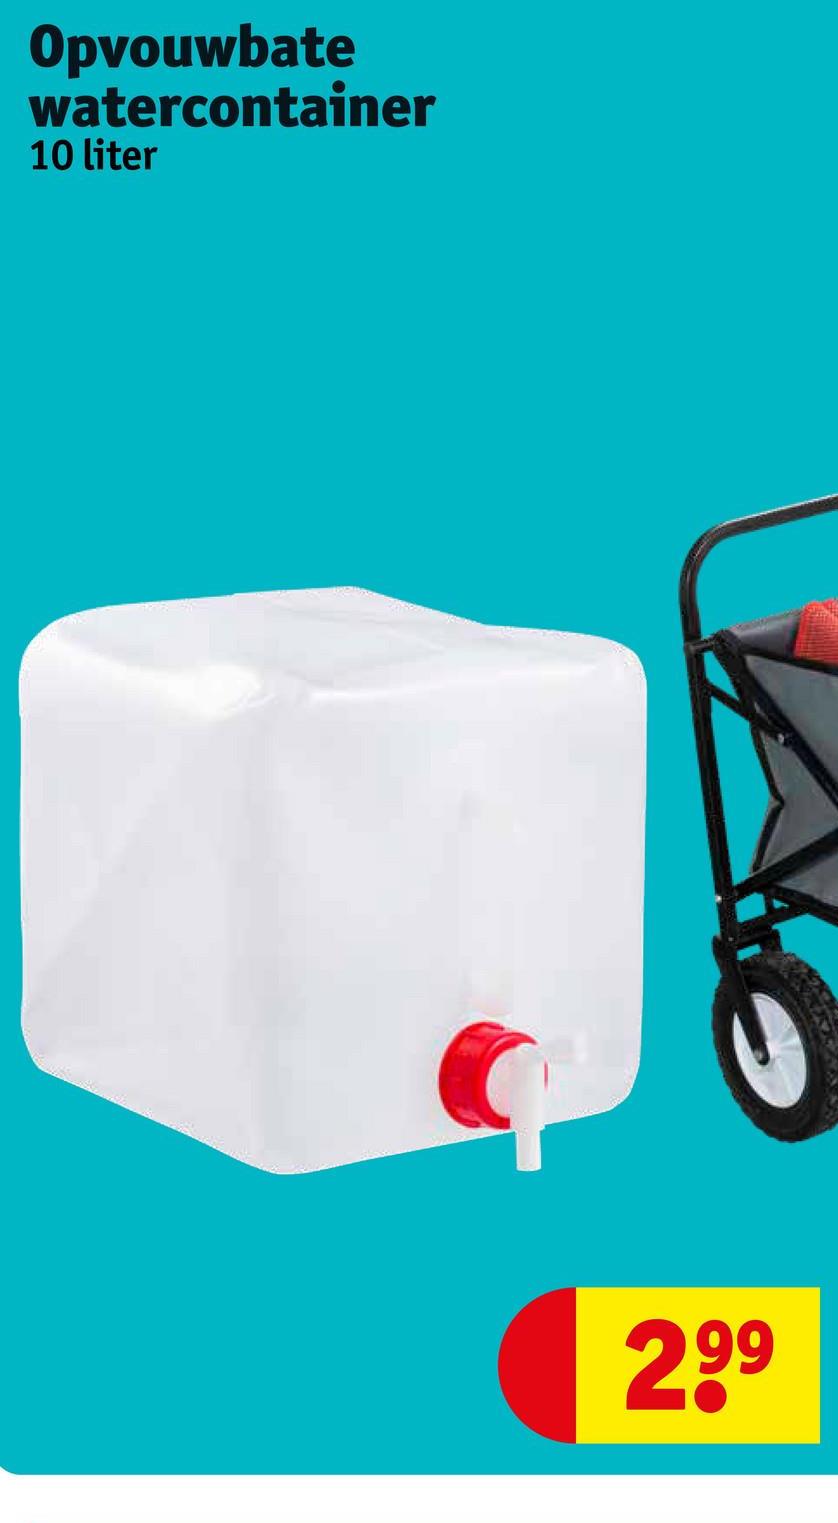 Opvouwbate
watercontainer
10 liter
2⁹⁹